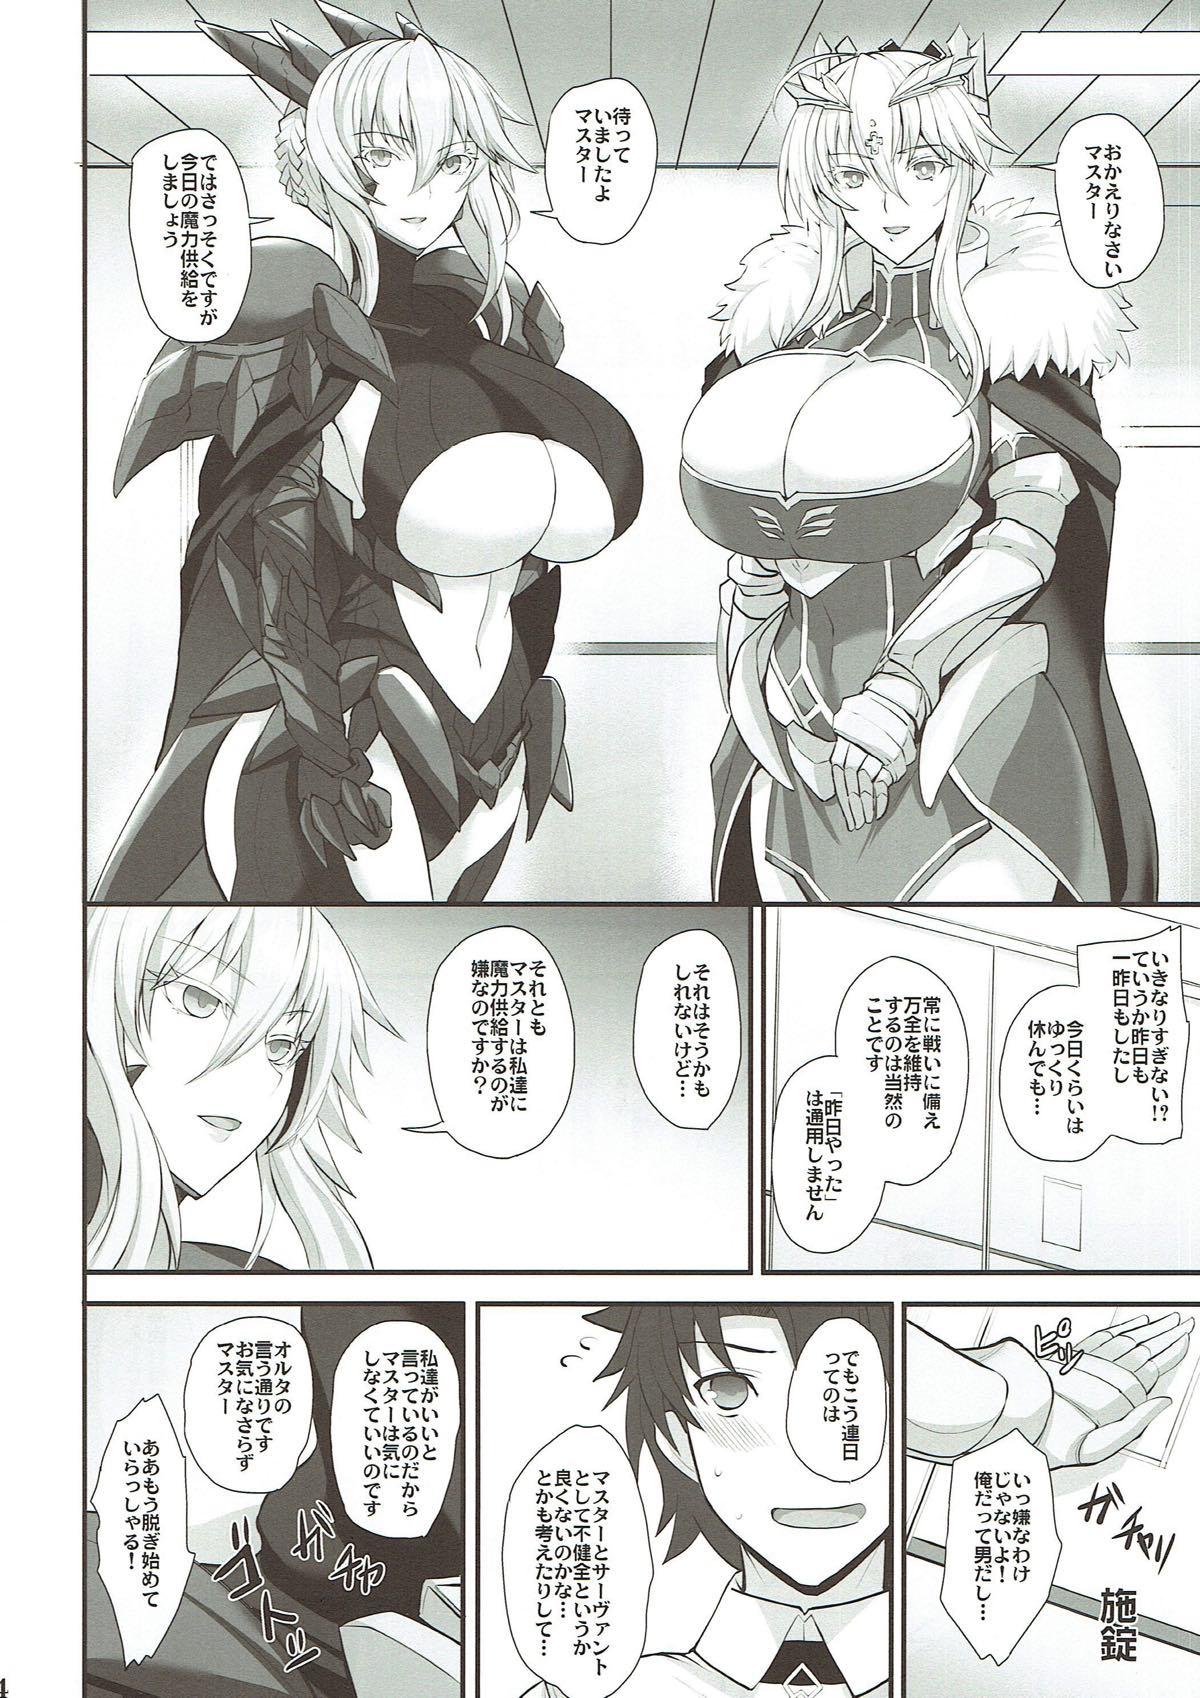 Family Chichiue to Issho - Fate grand order Femdom - Page 4